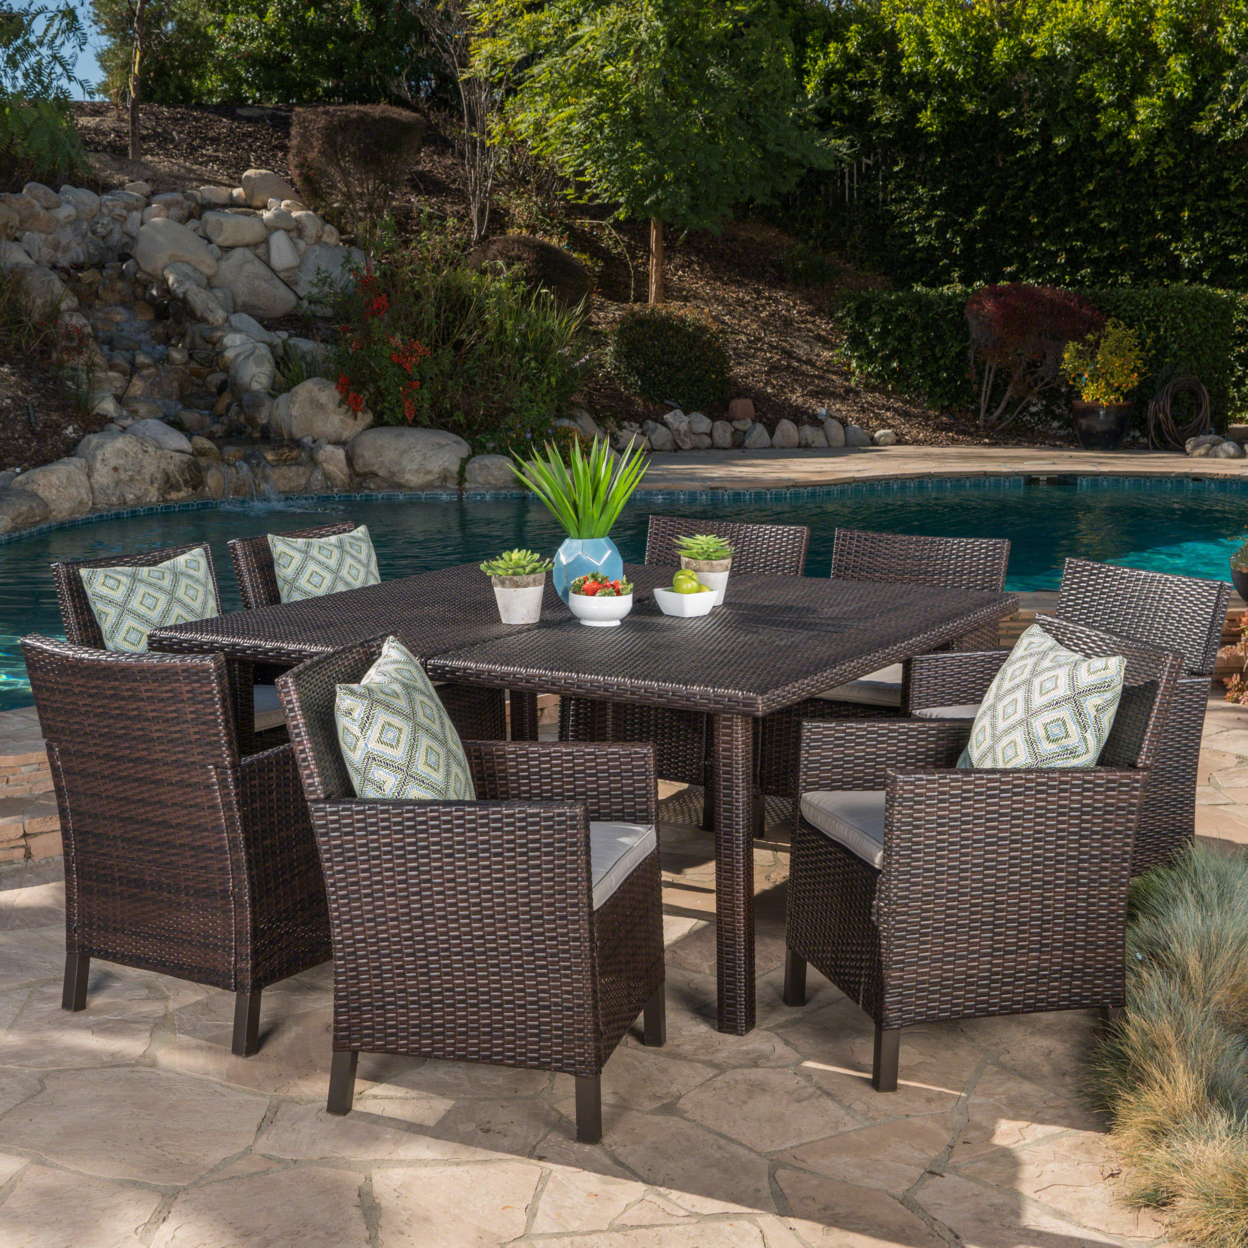 Alice Outdoor 9 Piece Wicker Dining Set With Water Resistant Cushions - Multi-brown/Light Brown